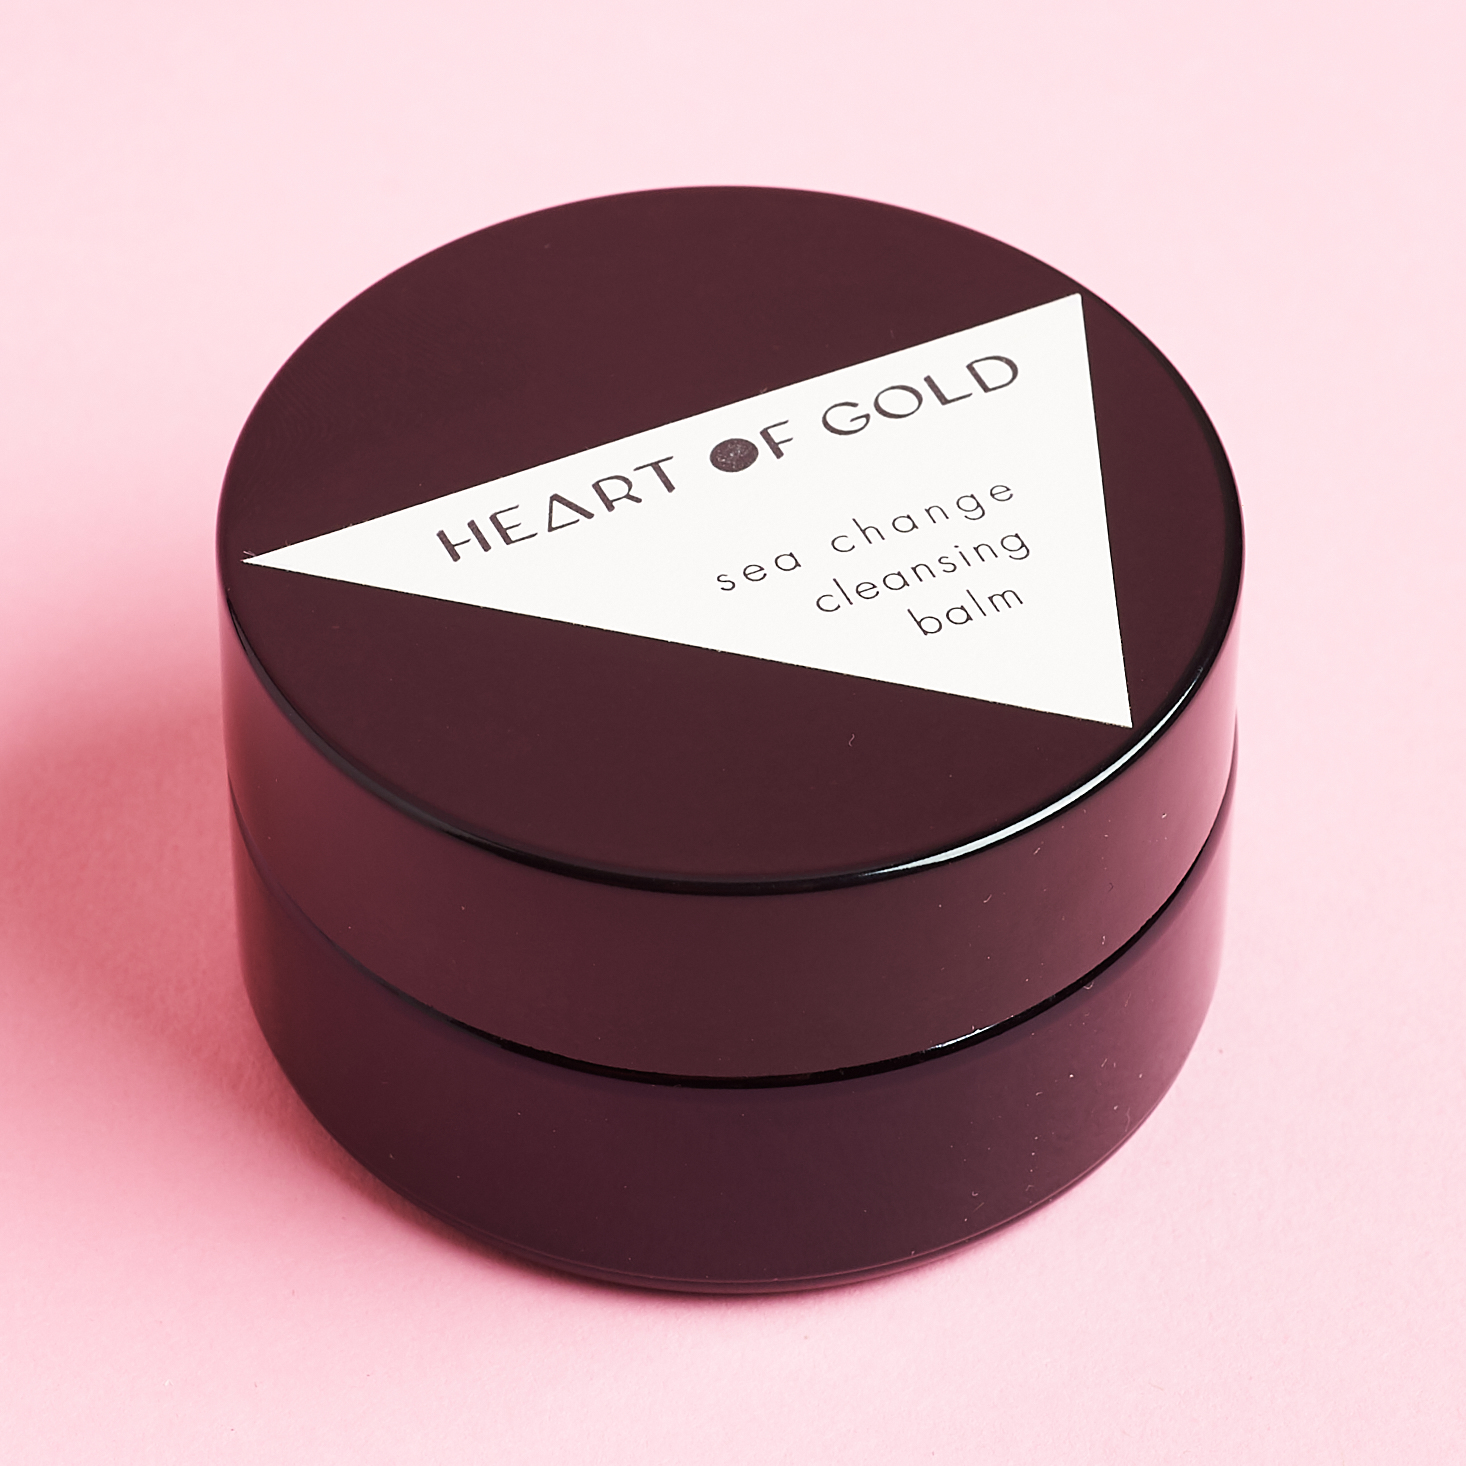 Heart of Gold Sea Change Cleansing Balm